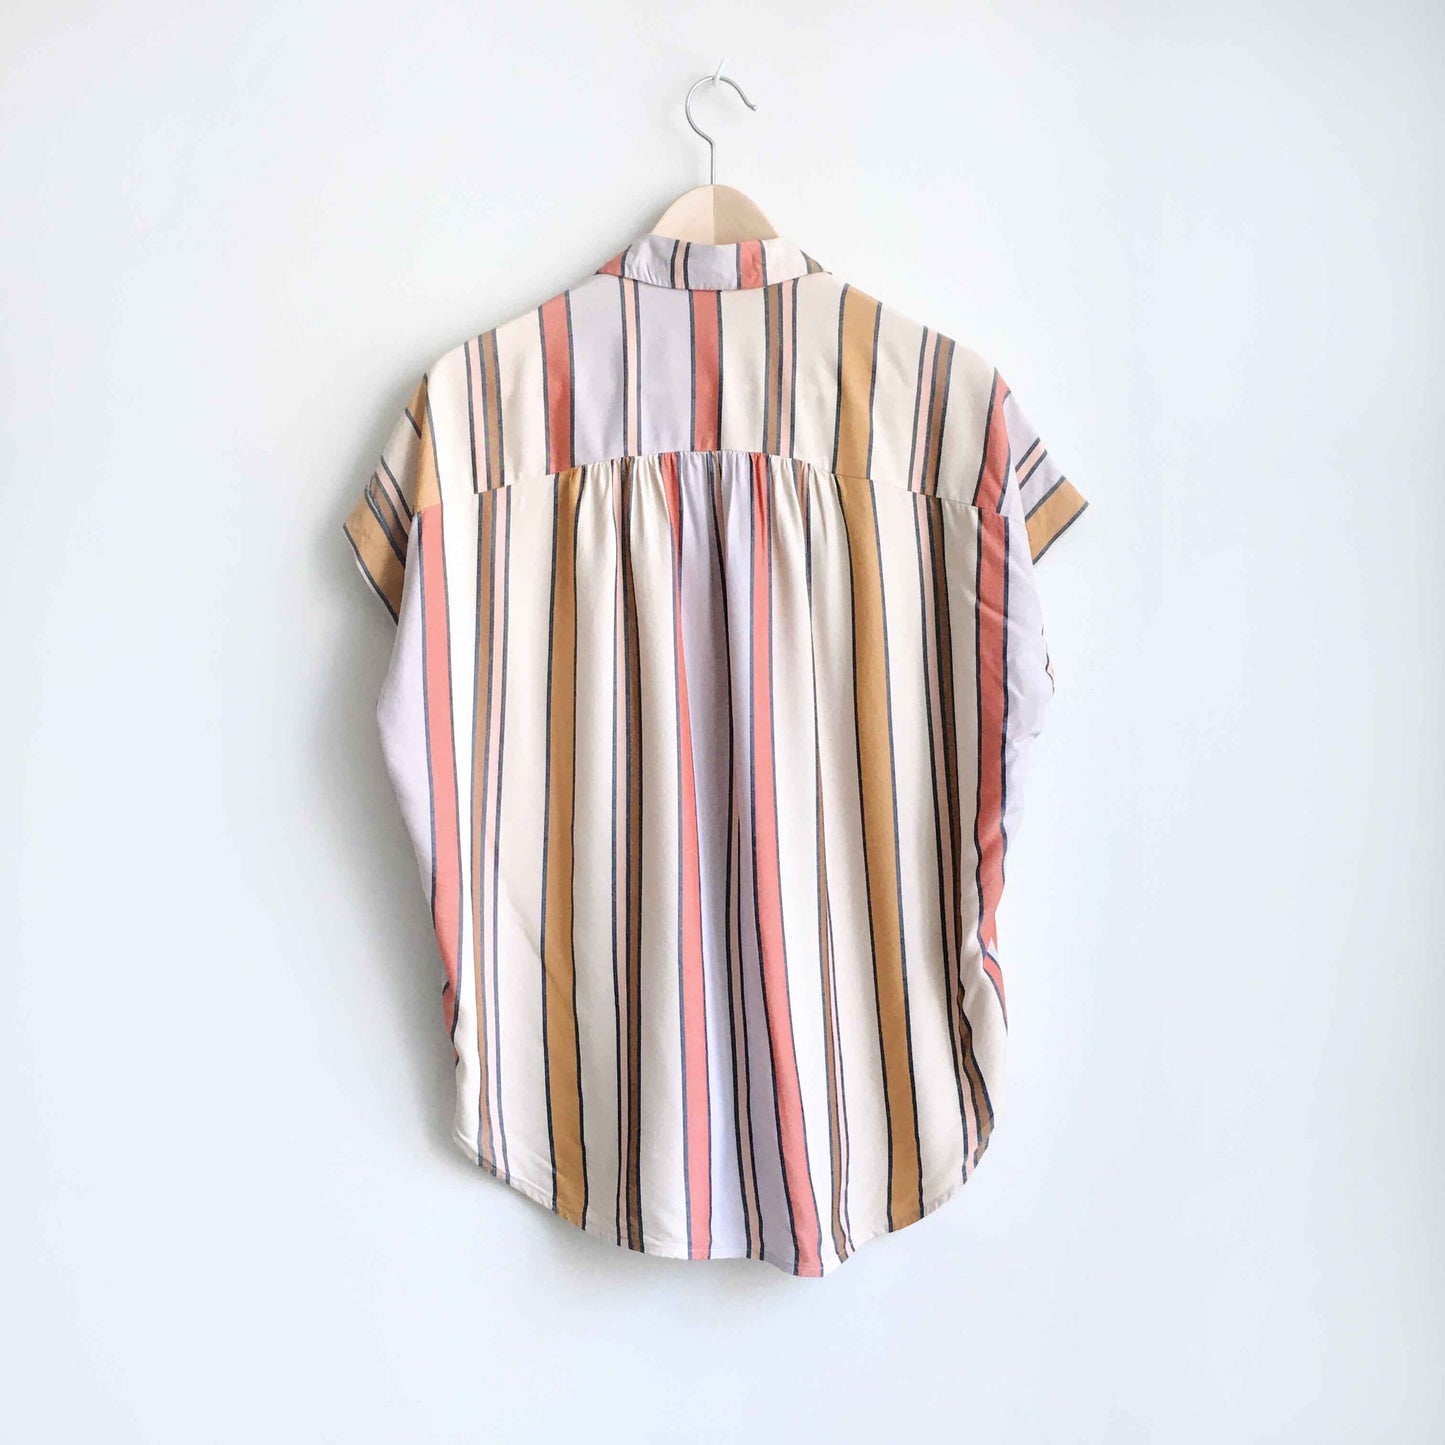 madewell central button down shirt in towel stripe - size xs